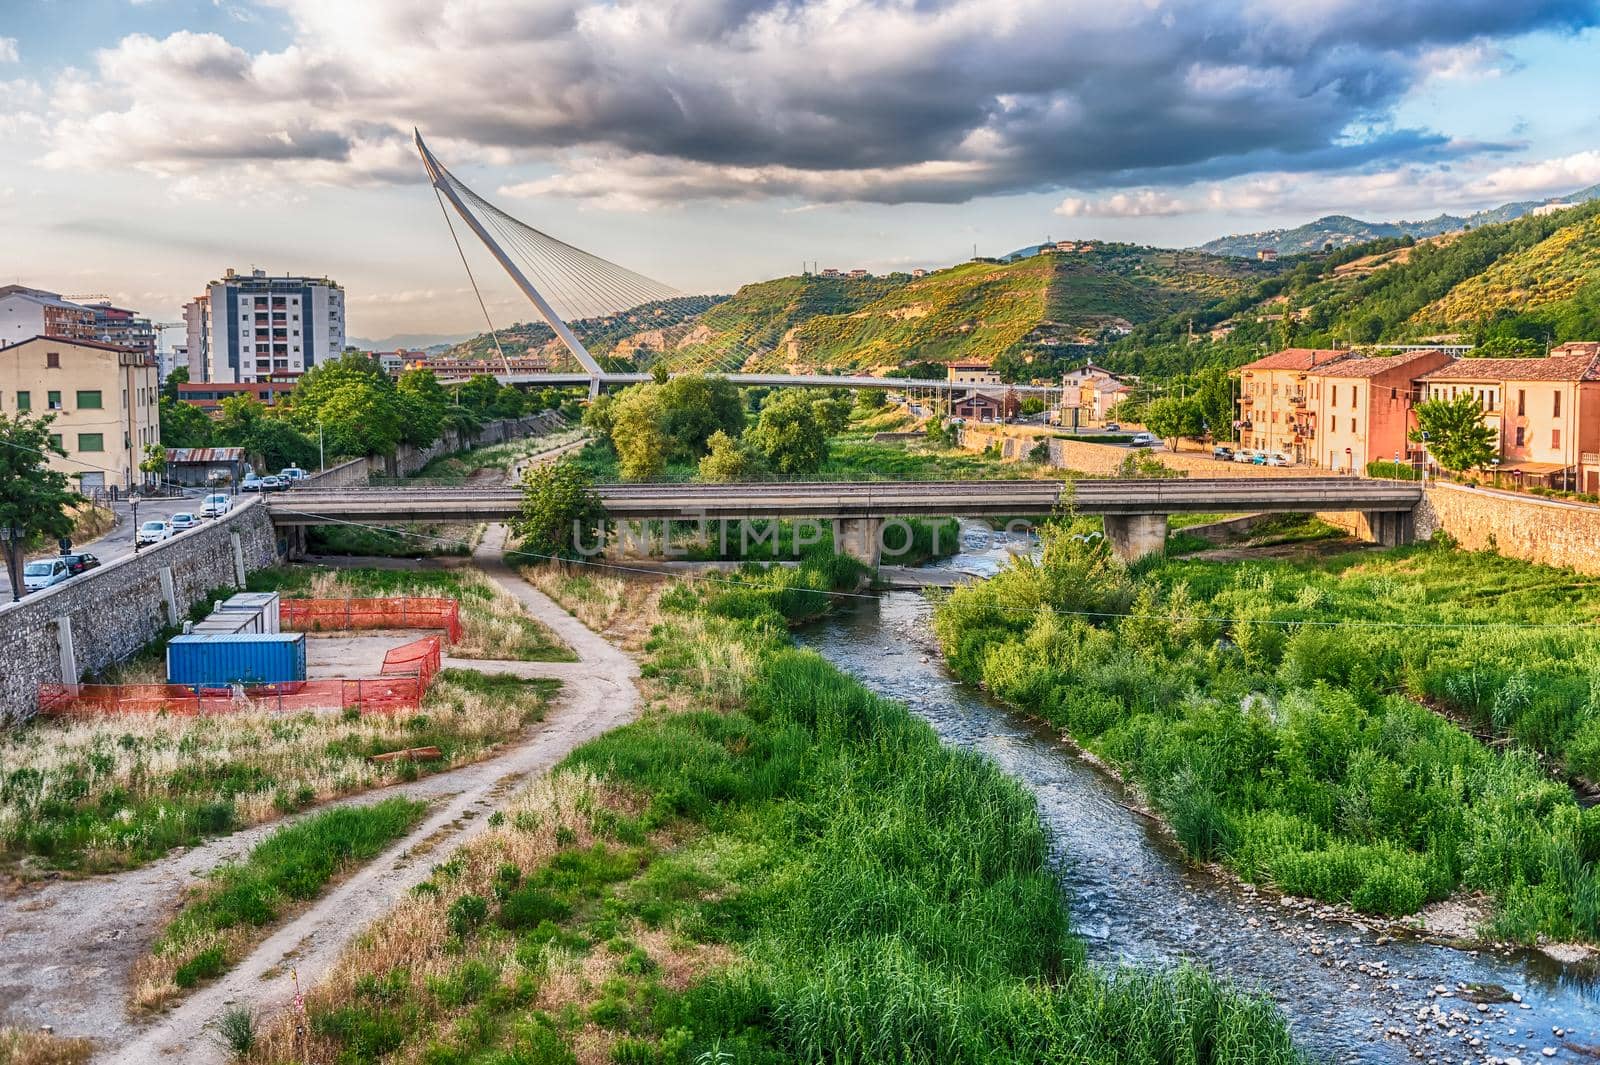 Scenic view over the Crathis river and Calatrava's Bridge in the Old Town of Cosenza, Italy